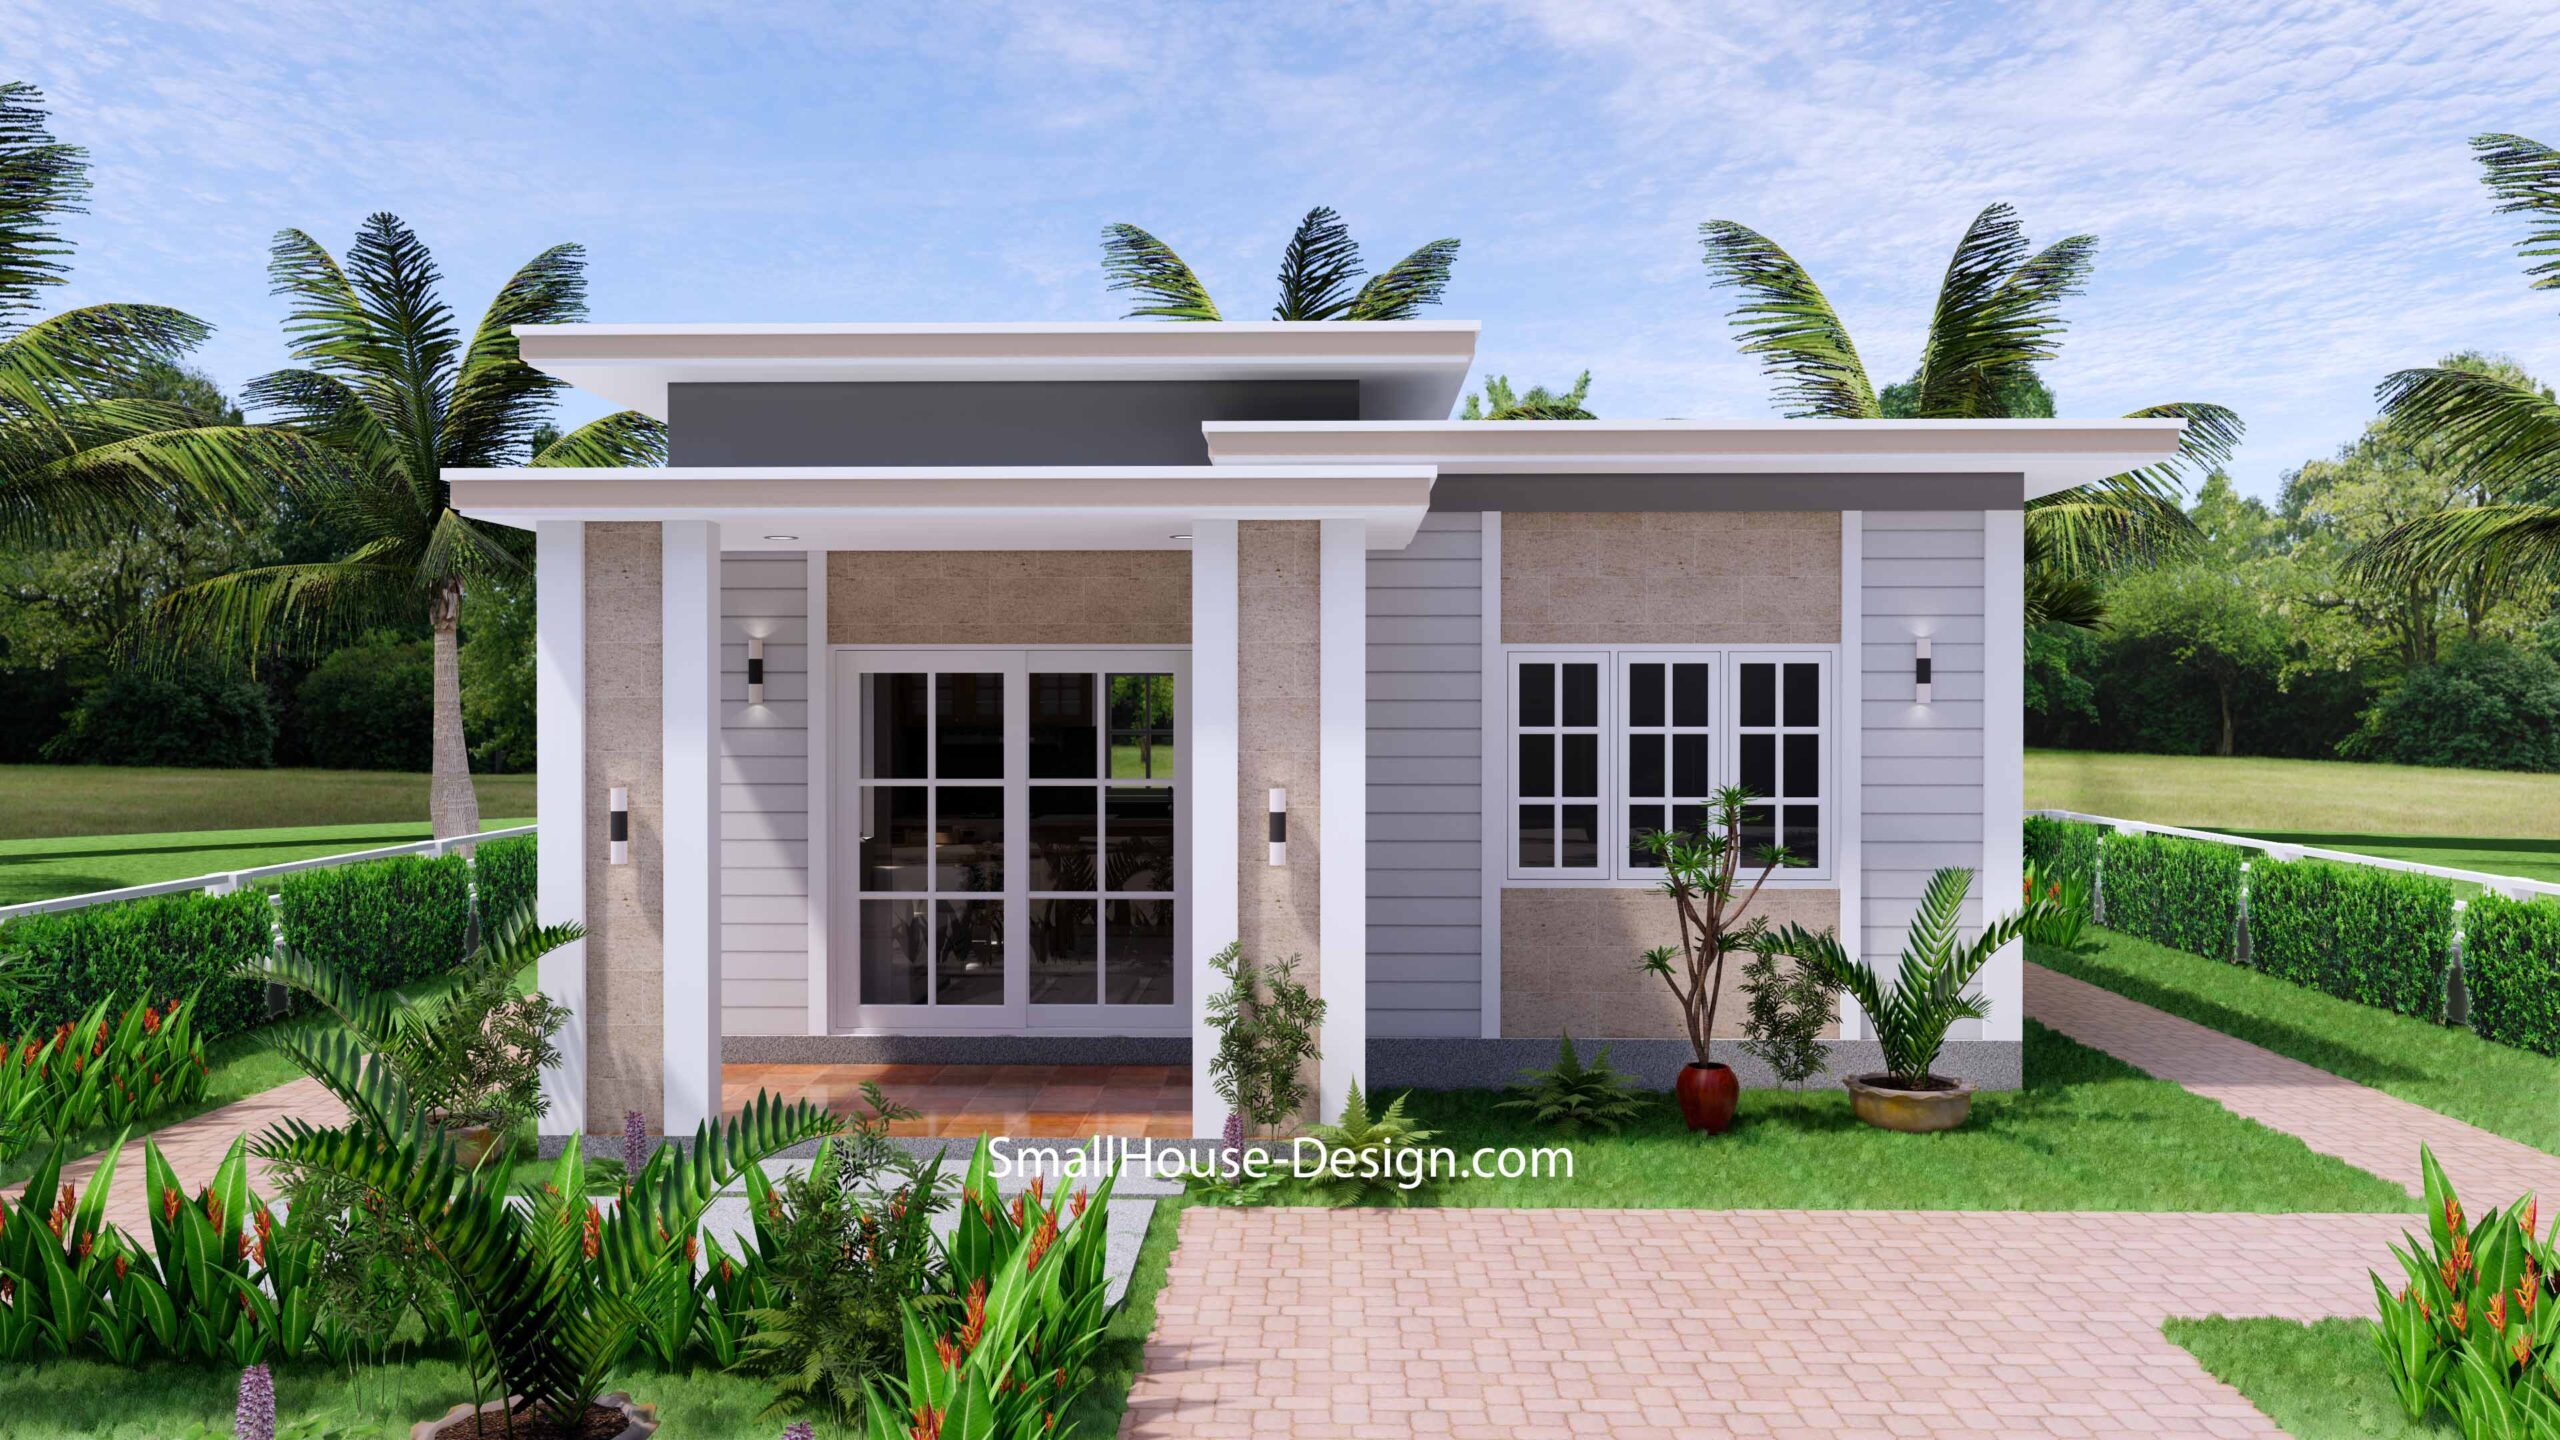 Small House Plan 7x7 with 1 Bedroom Flat Roof - Small House Design